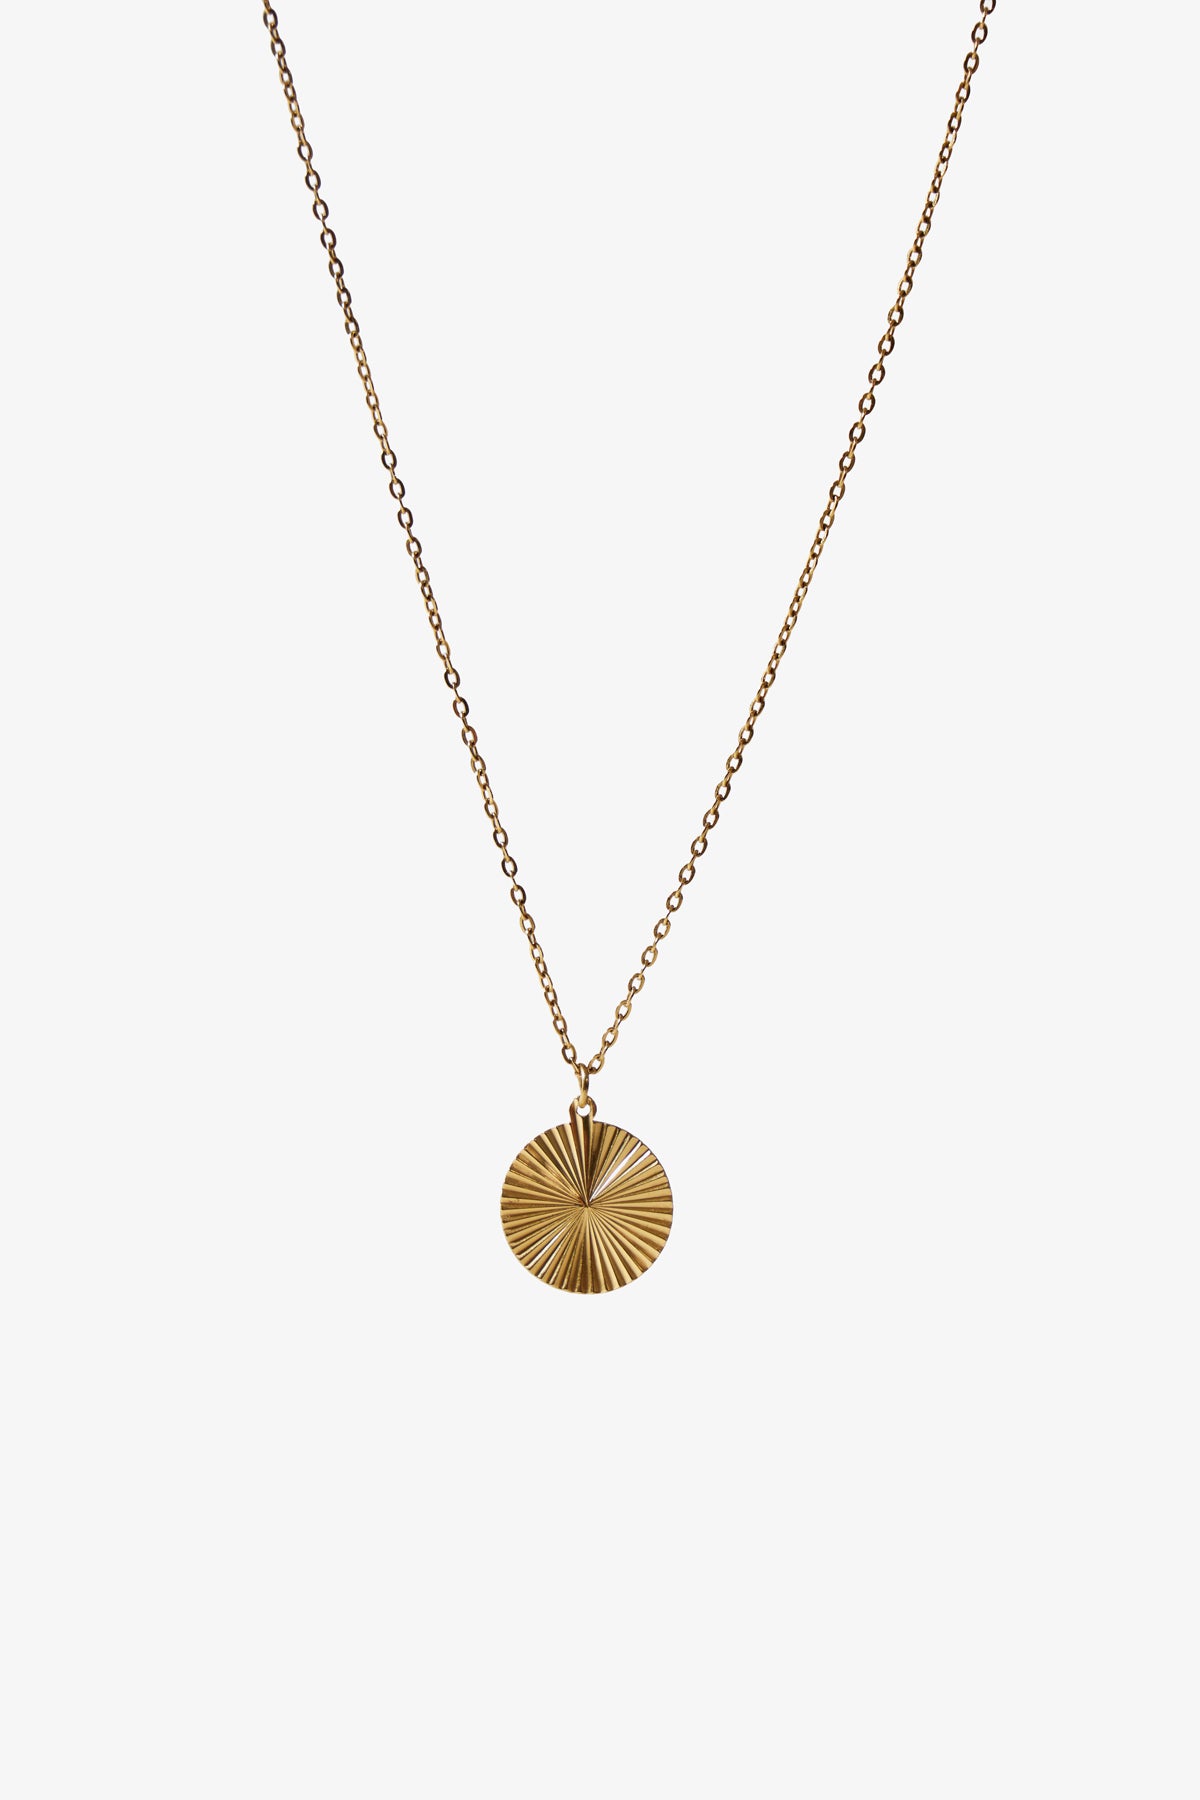 18K Gold-Filled Necklace with Radial Pendant